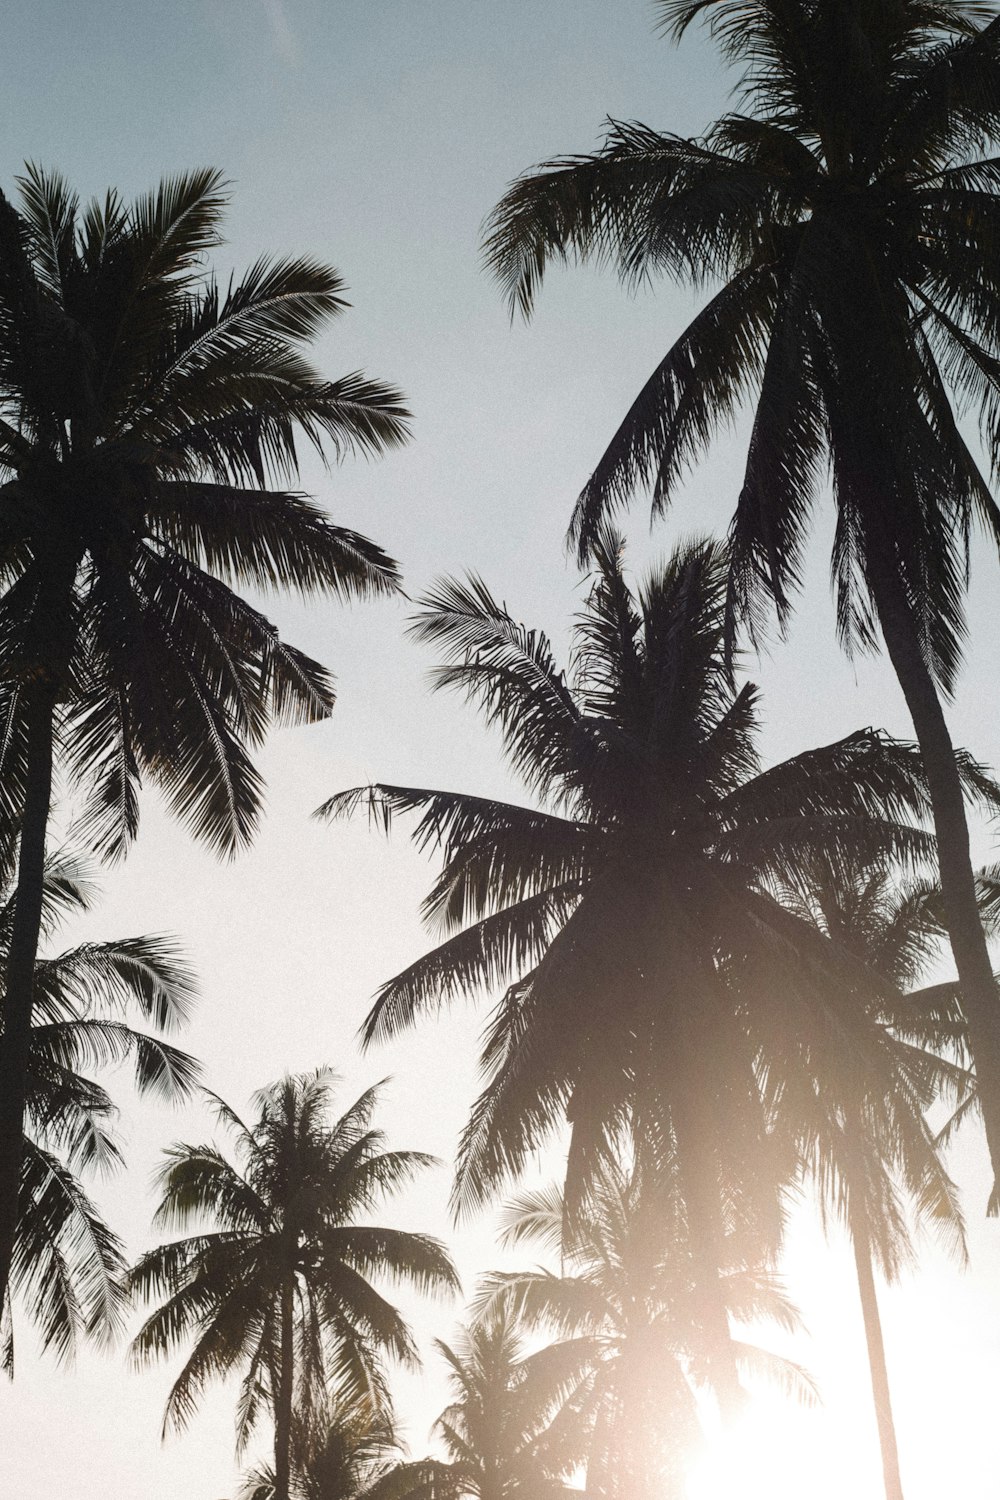 the sun is shining through the palm trees